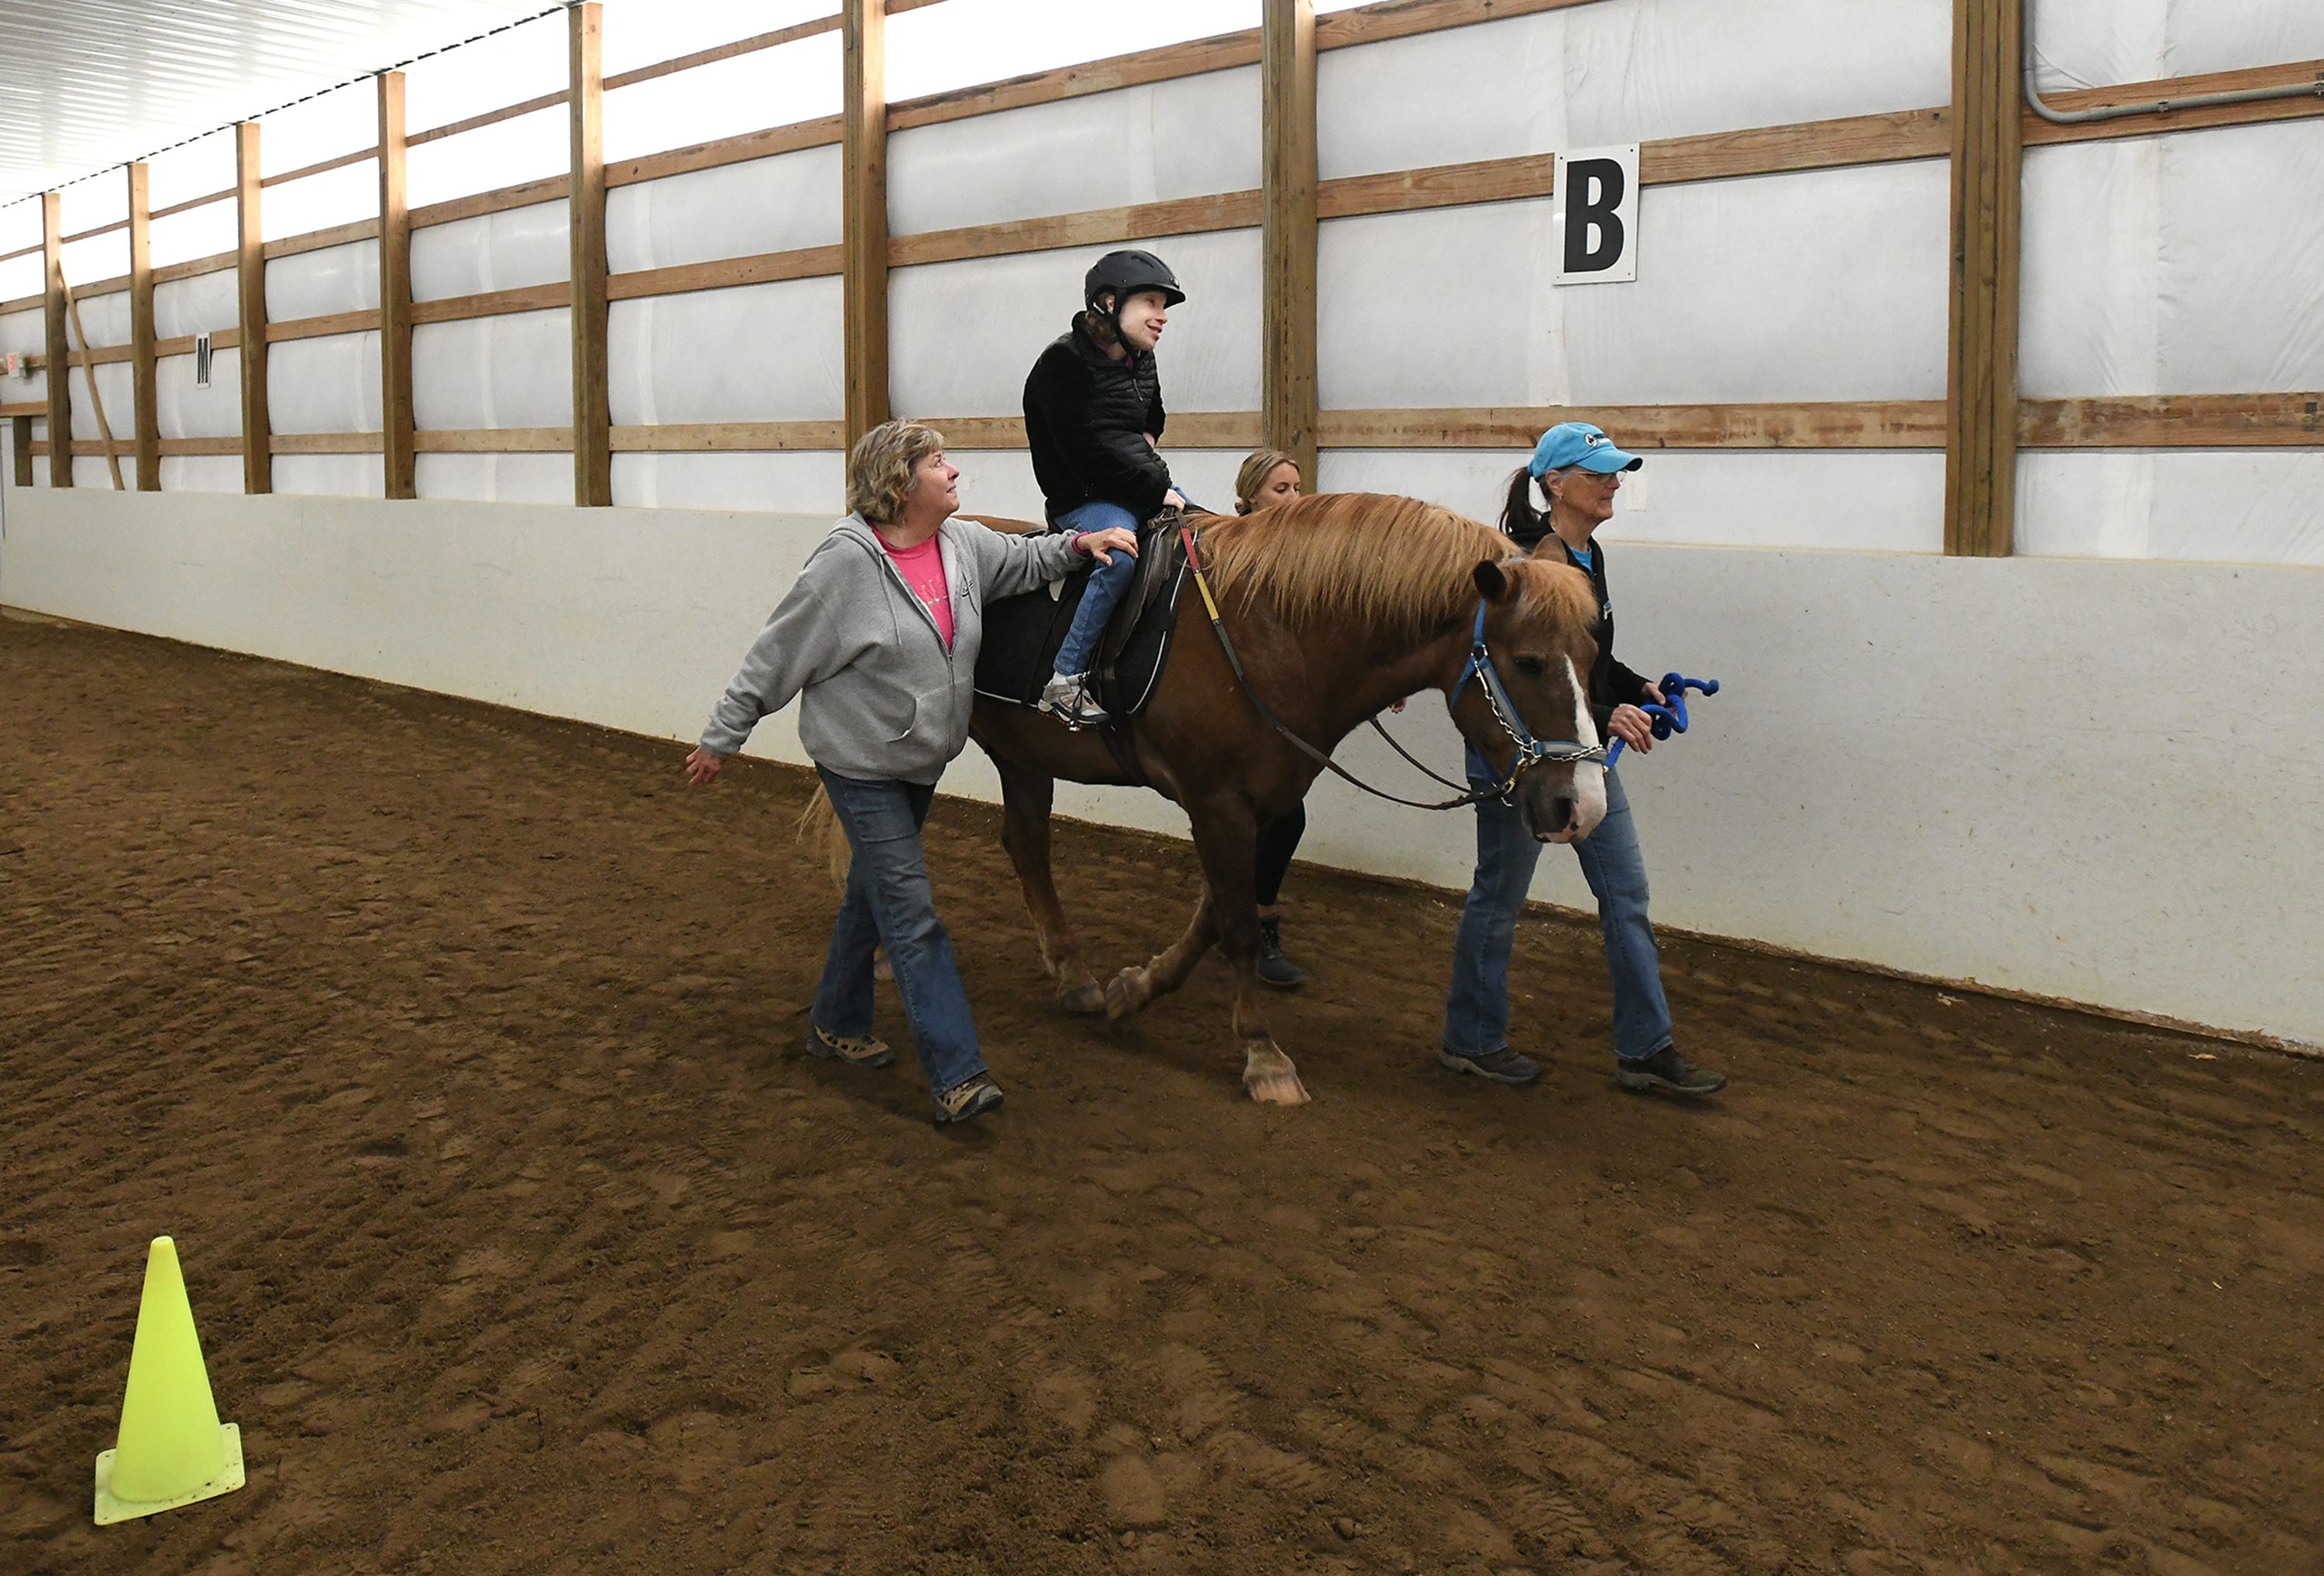 Elizabeth Lerchin rides the horse Miko, with the help of volunteers Louise Moore, left, Pat Whitworth, leading the horse, and Ellie Clark, Tuesday morning in Ann Arbor.